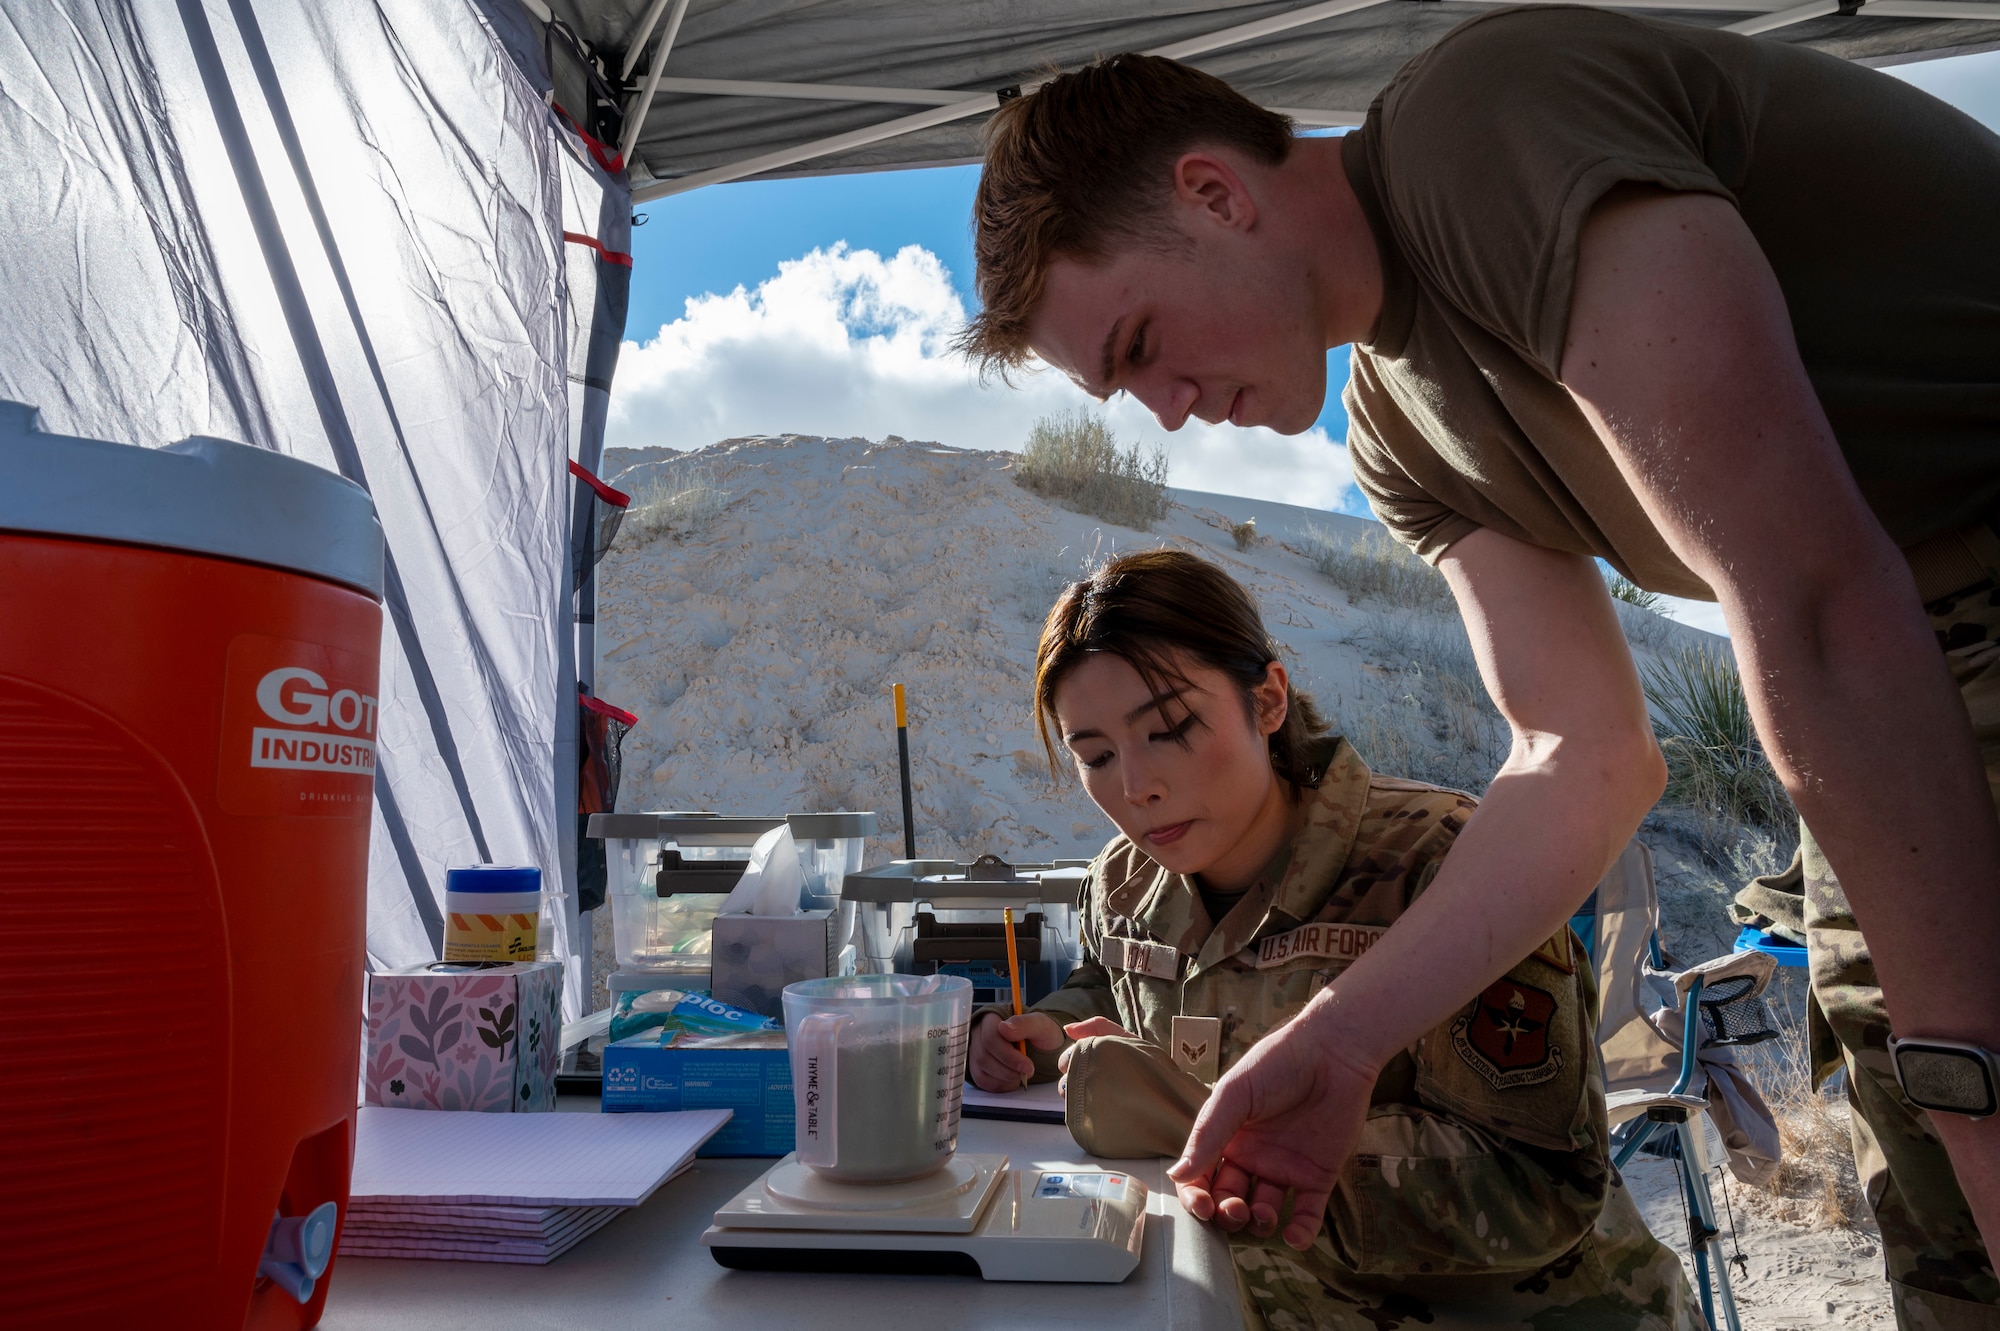 U.S. Air Force Airmen 1st Class Adam Sapp and Kiandra Mandal, 54th Operations Support Squadron weather flight apprentices, measure a sand sample during an exercise at Holloman Air Force Base, New Mexico, Jan. 22, 2024. The 54th OSS provides the base with past, present and future weather observations that are crucial to providing the surrounding squadrons and units with air superiority. (U.S Air Force photo by Airman 1st Class Isaiah Pedrazzini)